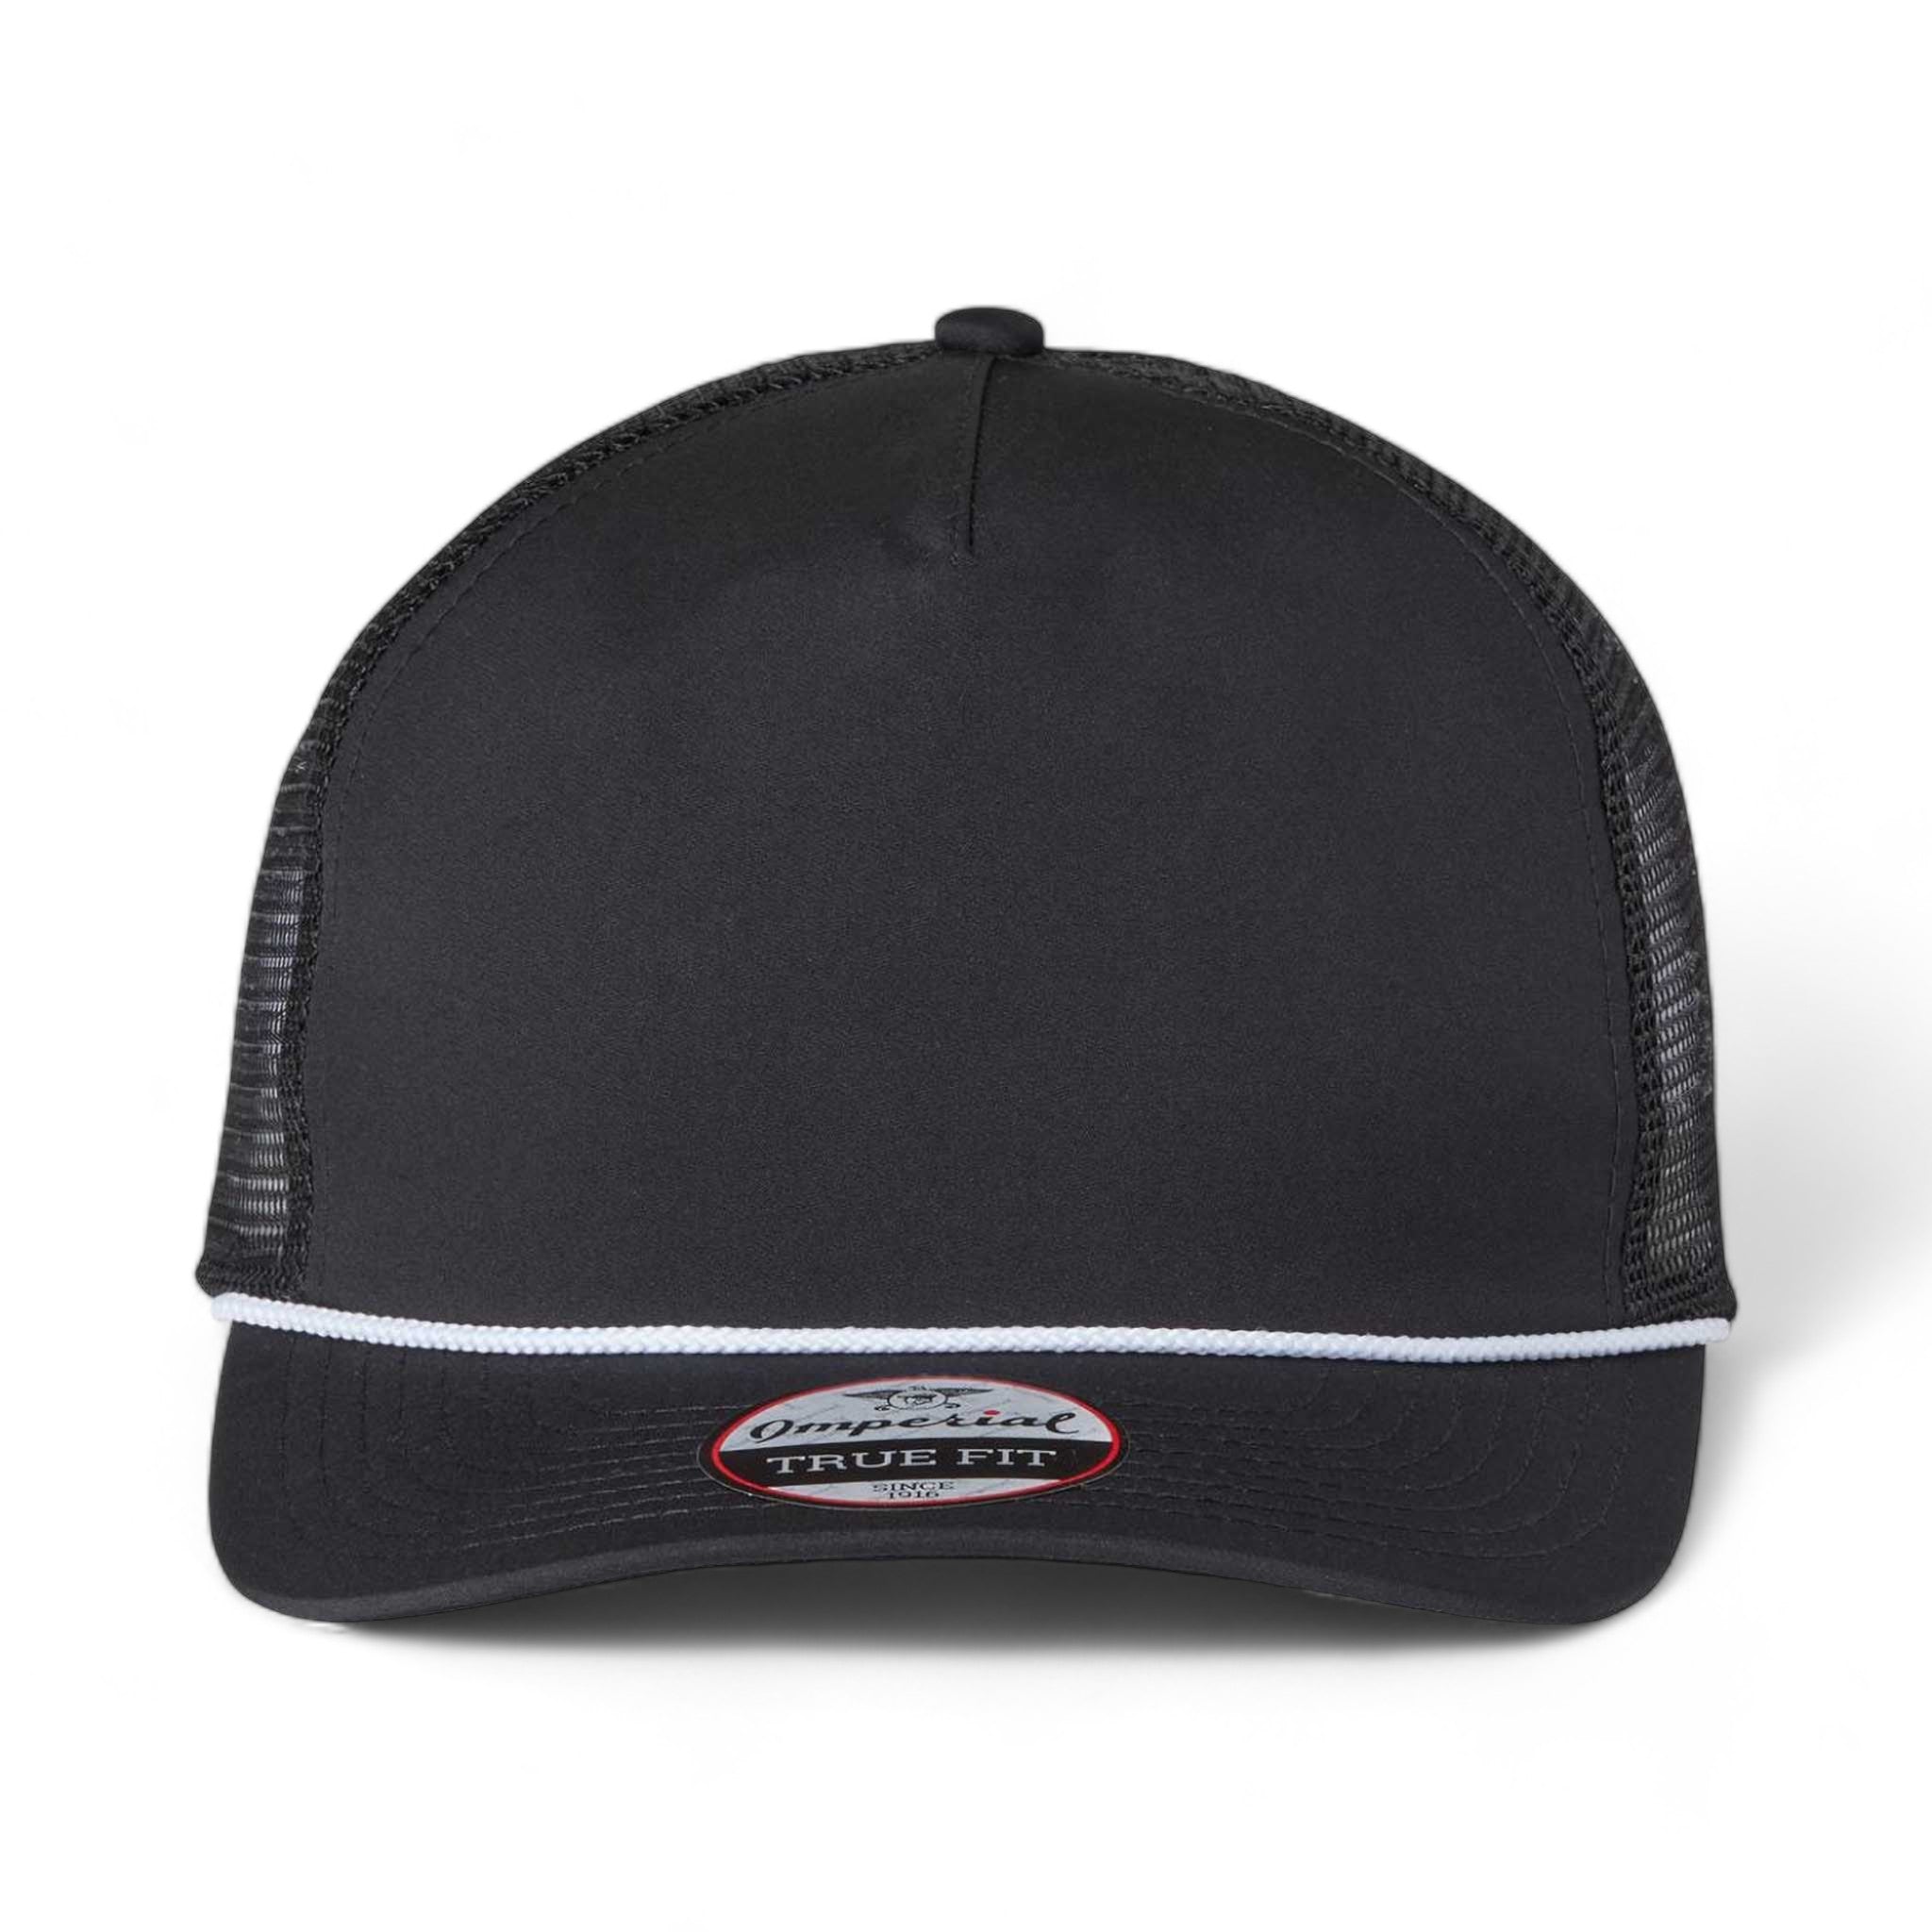 Front view of Imperial 5055 custom hat in black, black and white